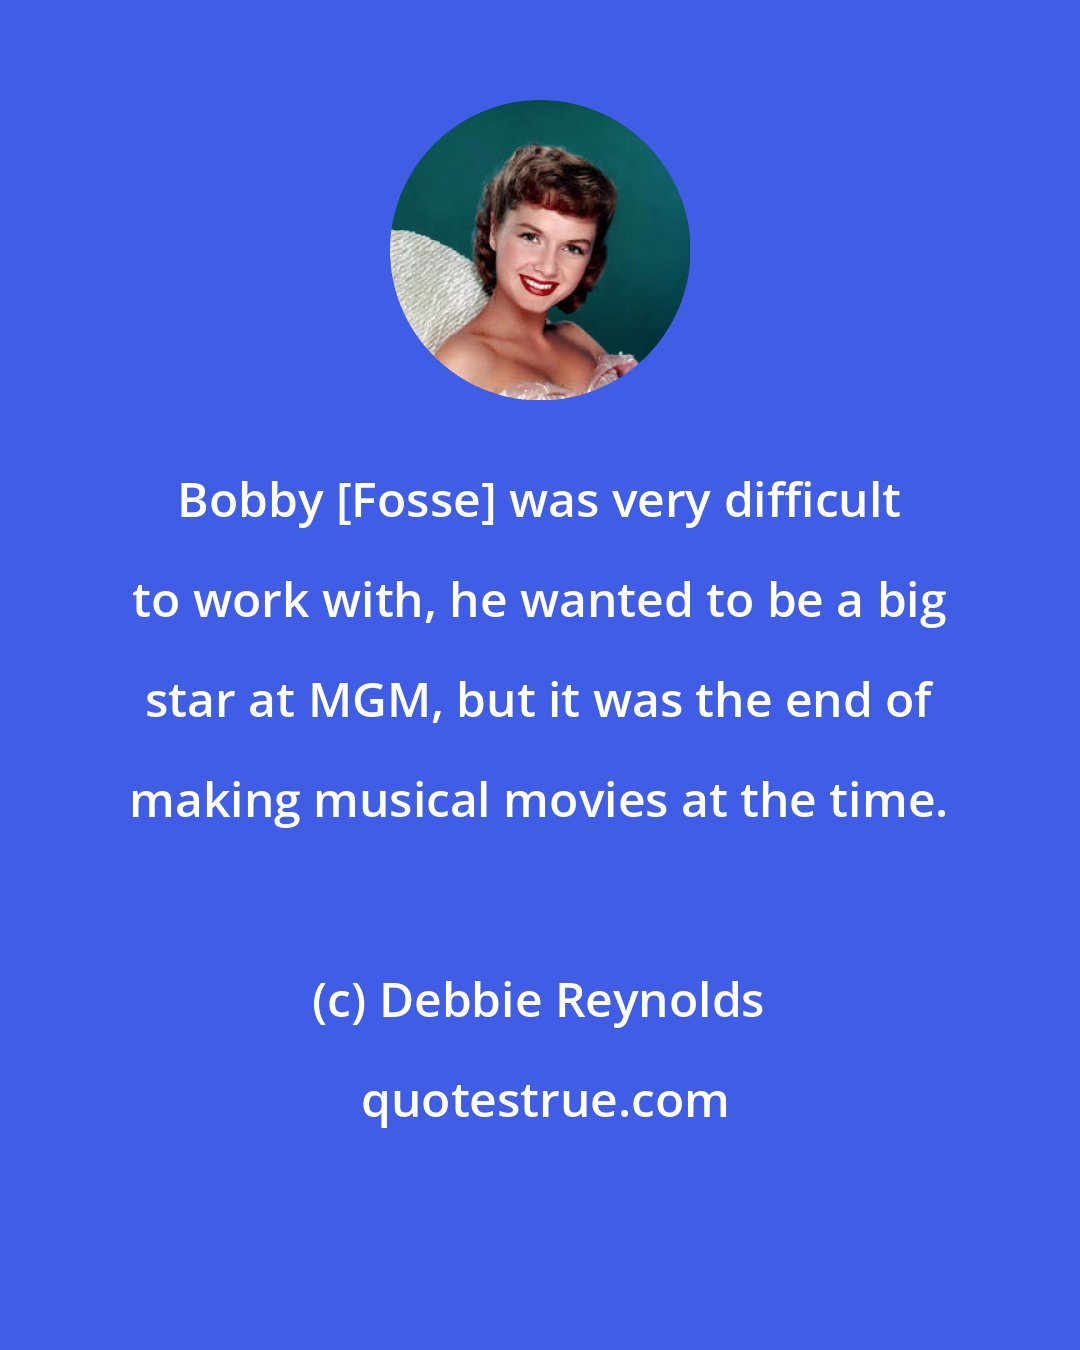 Debbie Reynolds: Bobby [Fosse] was very difficult to work with, he wanted to be a big star at MGM, but it was the end of making musical movies at the time.